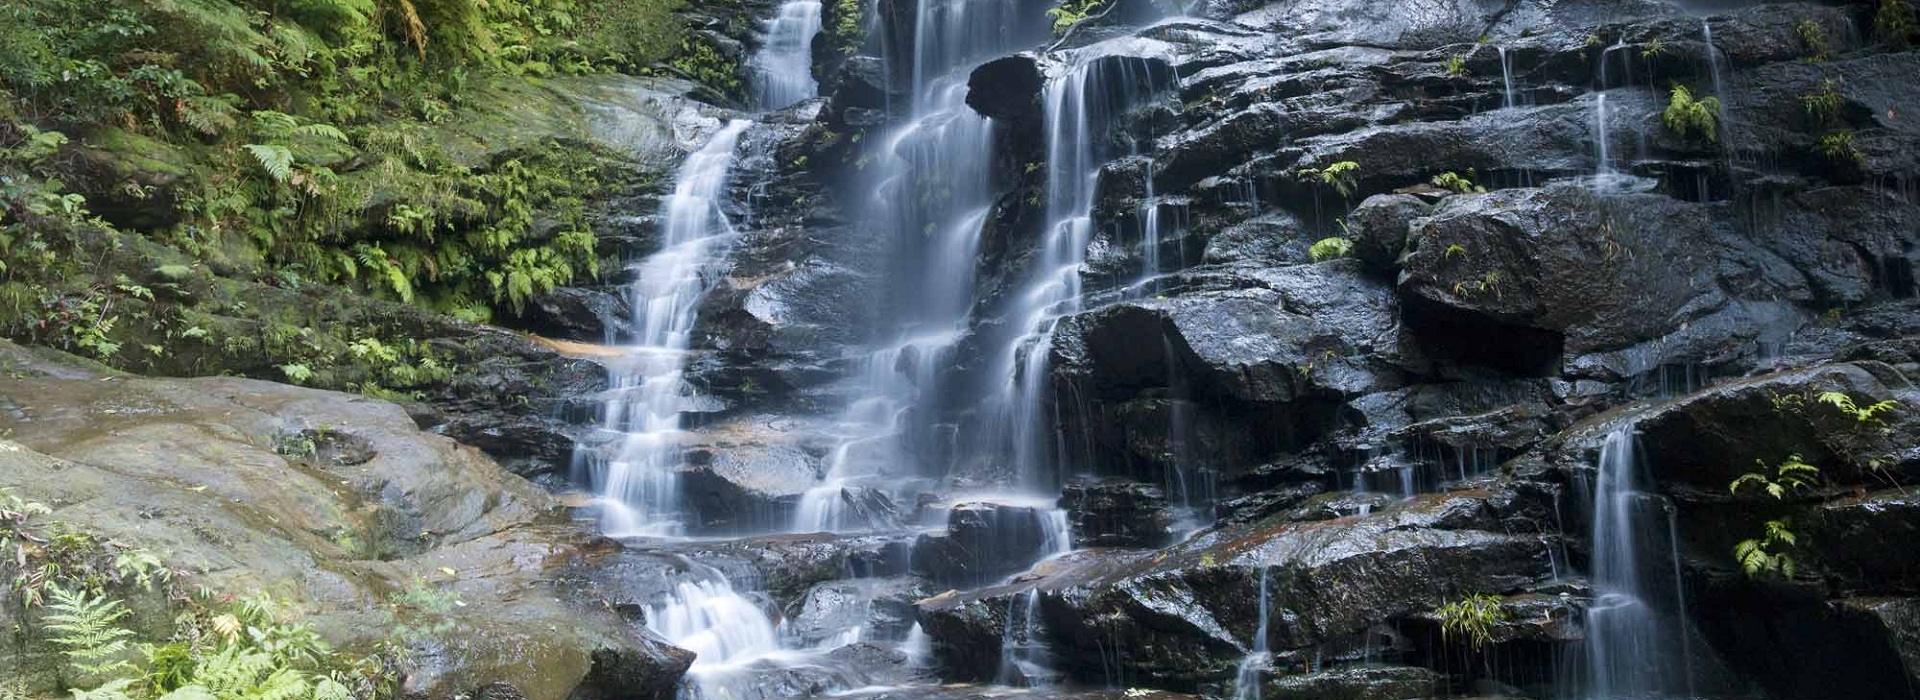 Ten Easy Walks in the Blue Mountains National Park